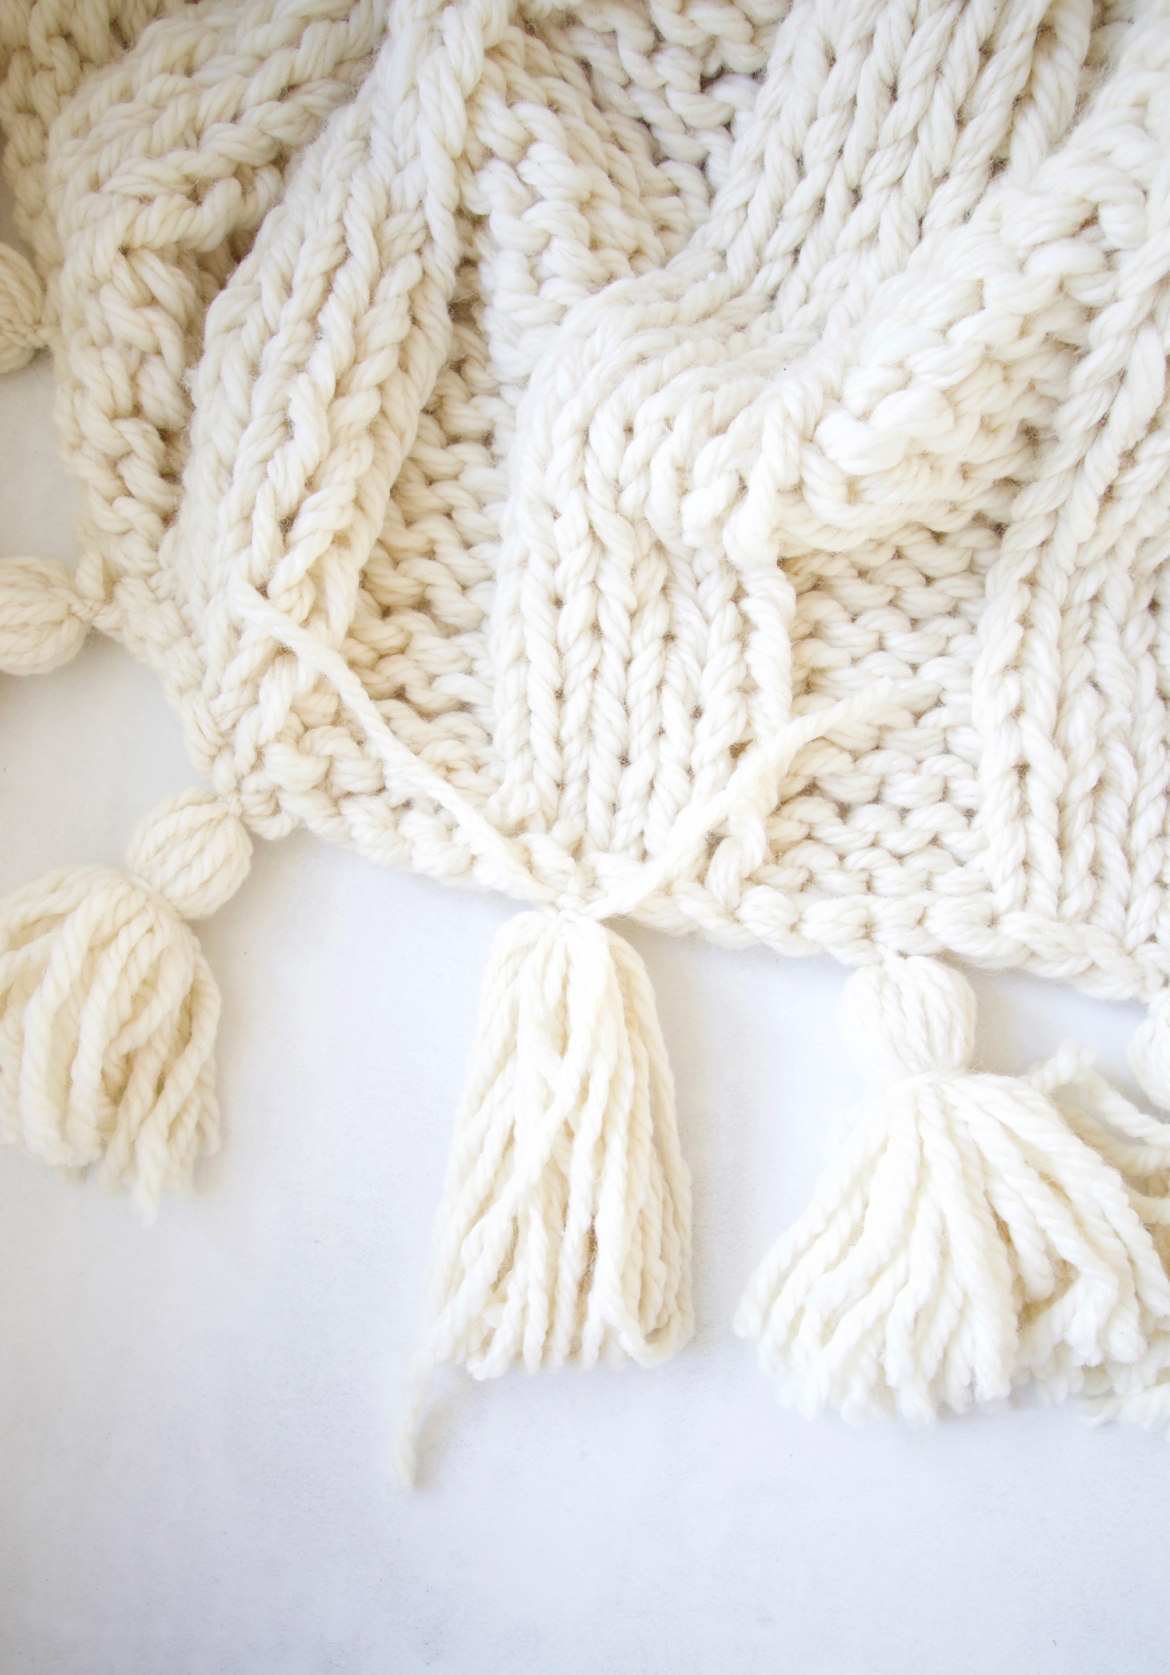 Step by Step Tassel Tutorial : How to make tassels for your chunky wool blanket.  These knit tassels will work for any blanket, knit blanket, or throw blanket. Easy to follow directions on DESIGN THE LIFE YOU WANT TO LIVE | LynneKnowlton.com